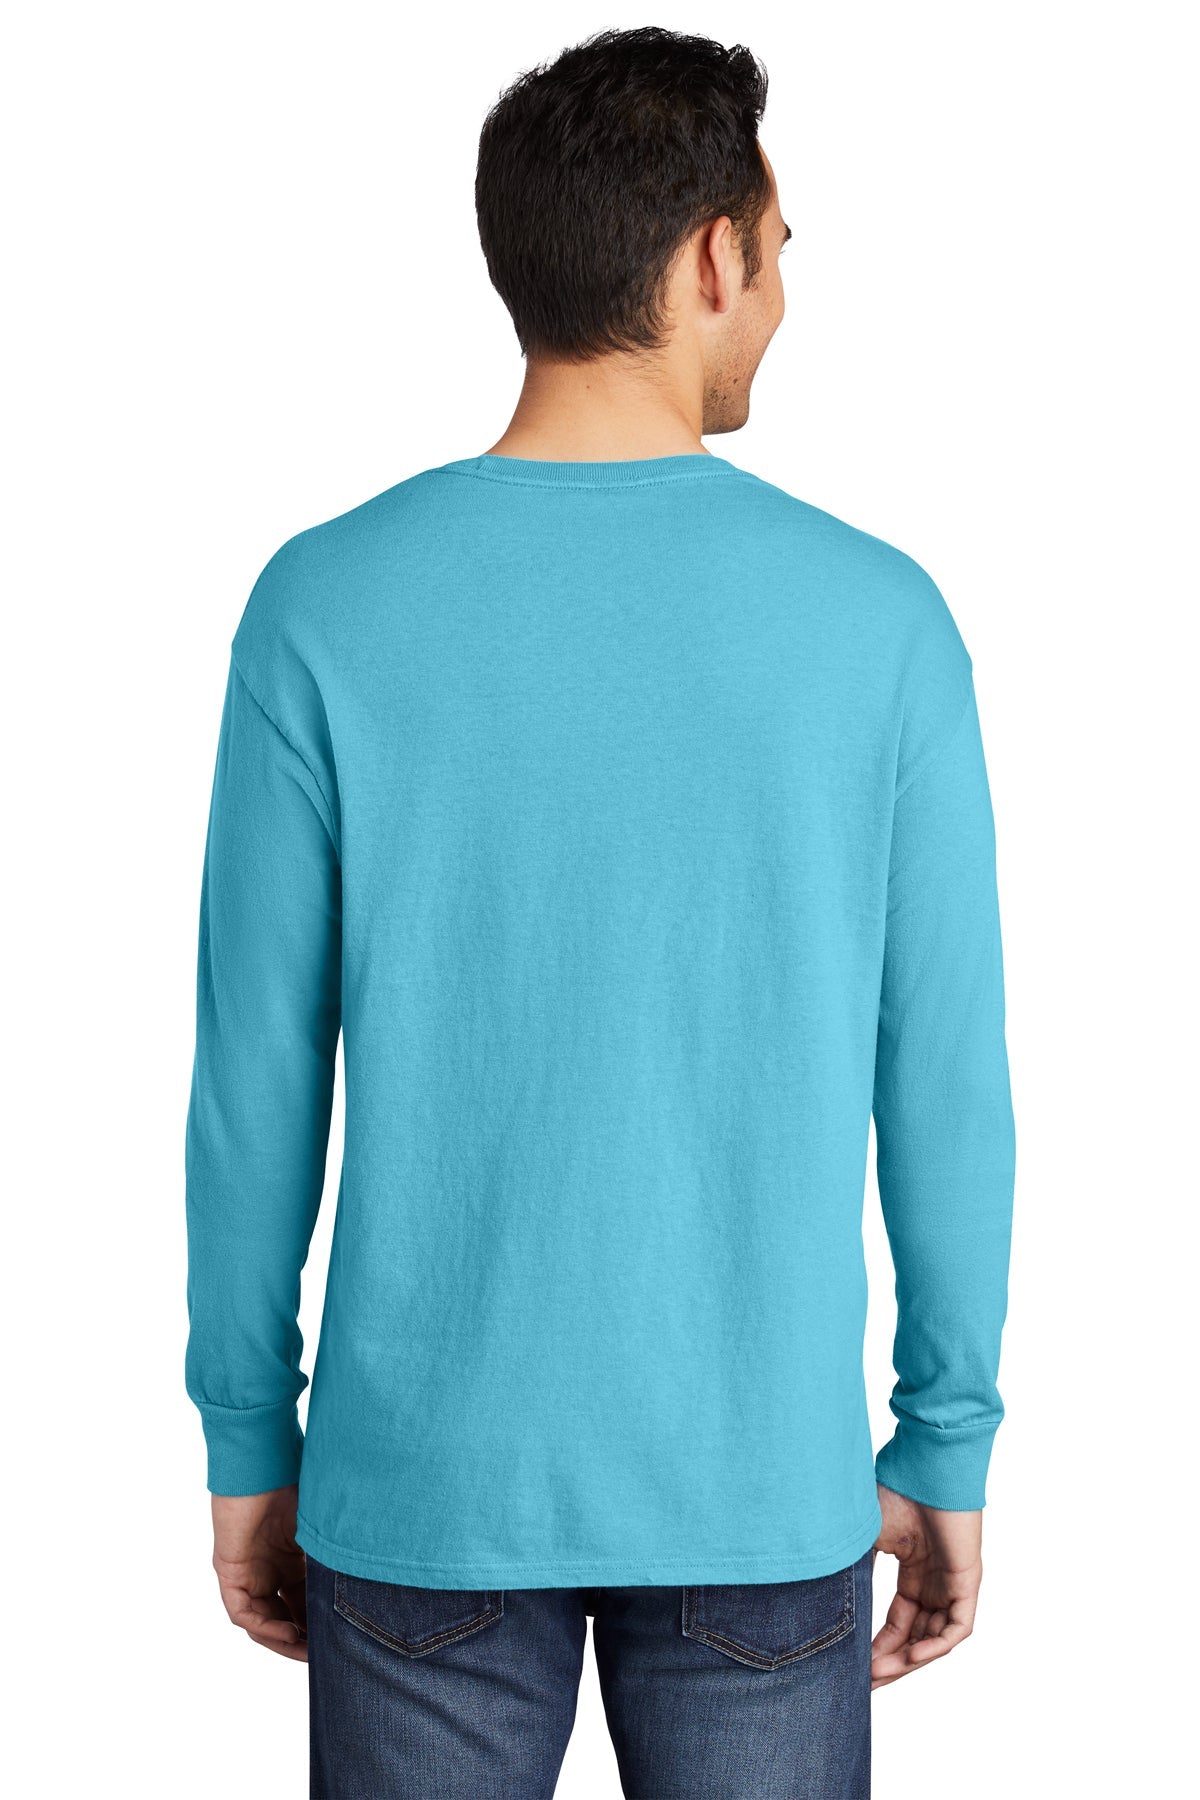 Port & Company Pigment-Dyed Long Sleeve Tee